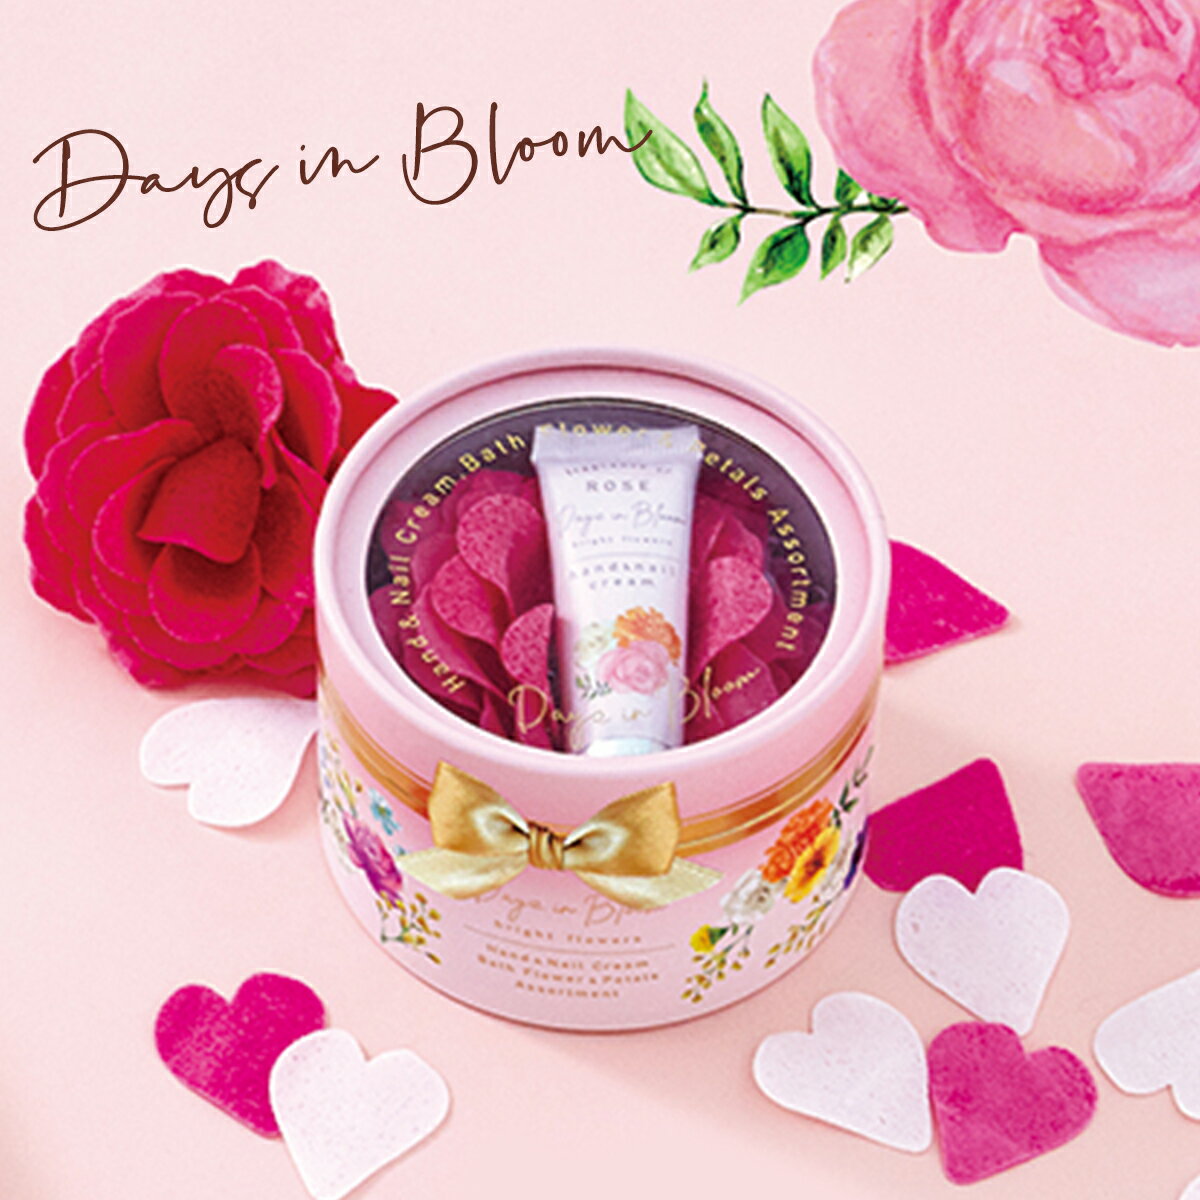 Days in Bloom デイズインブルーム bright flowers ブルーミングプチギフト ローズ【ボディケア 花 バスグッズ リラックス 誕生日 プレゼント 女子会 贈り物 ギフト お返し 可愛い いい匂い い…